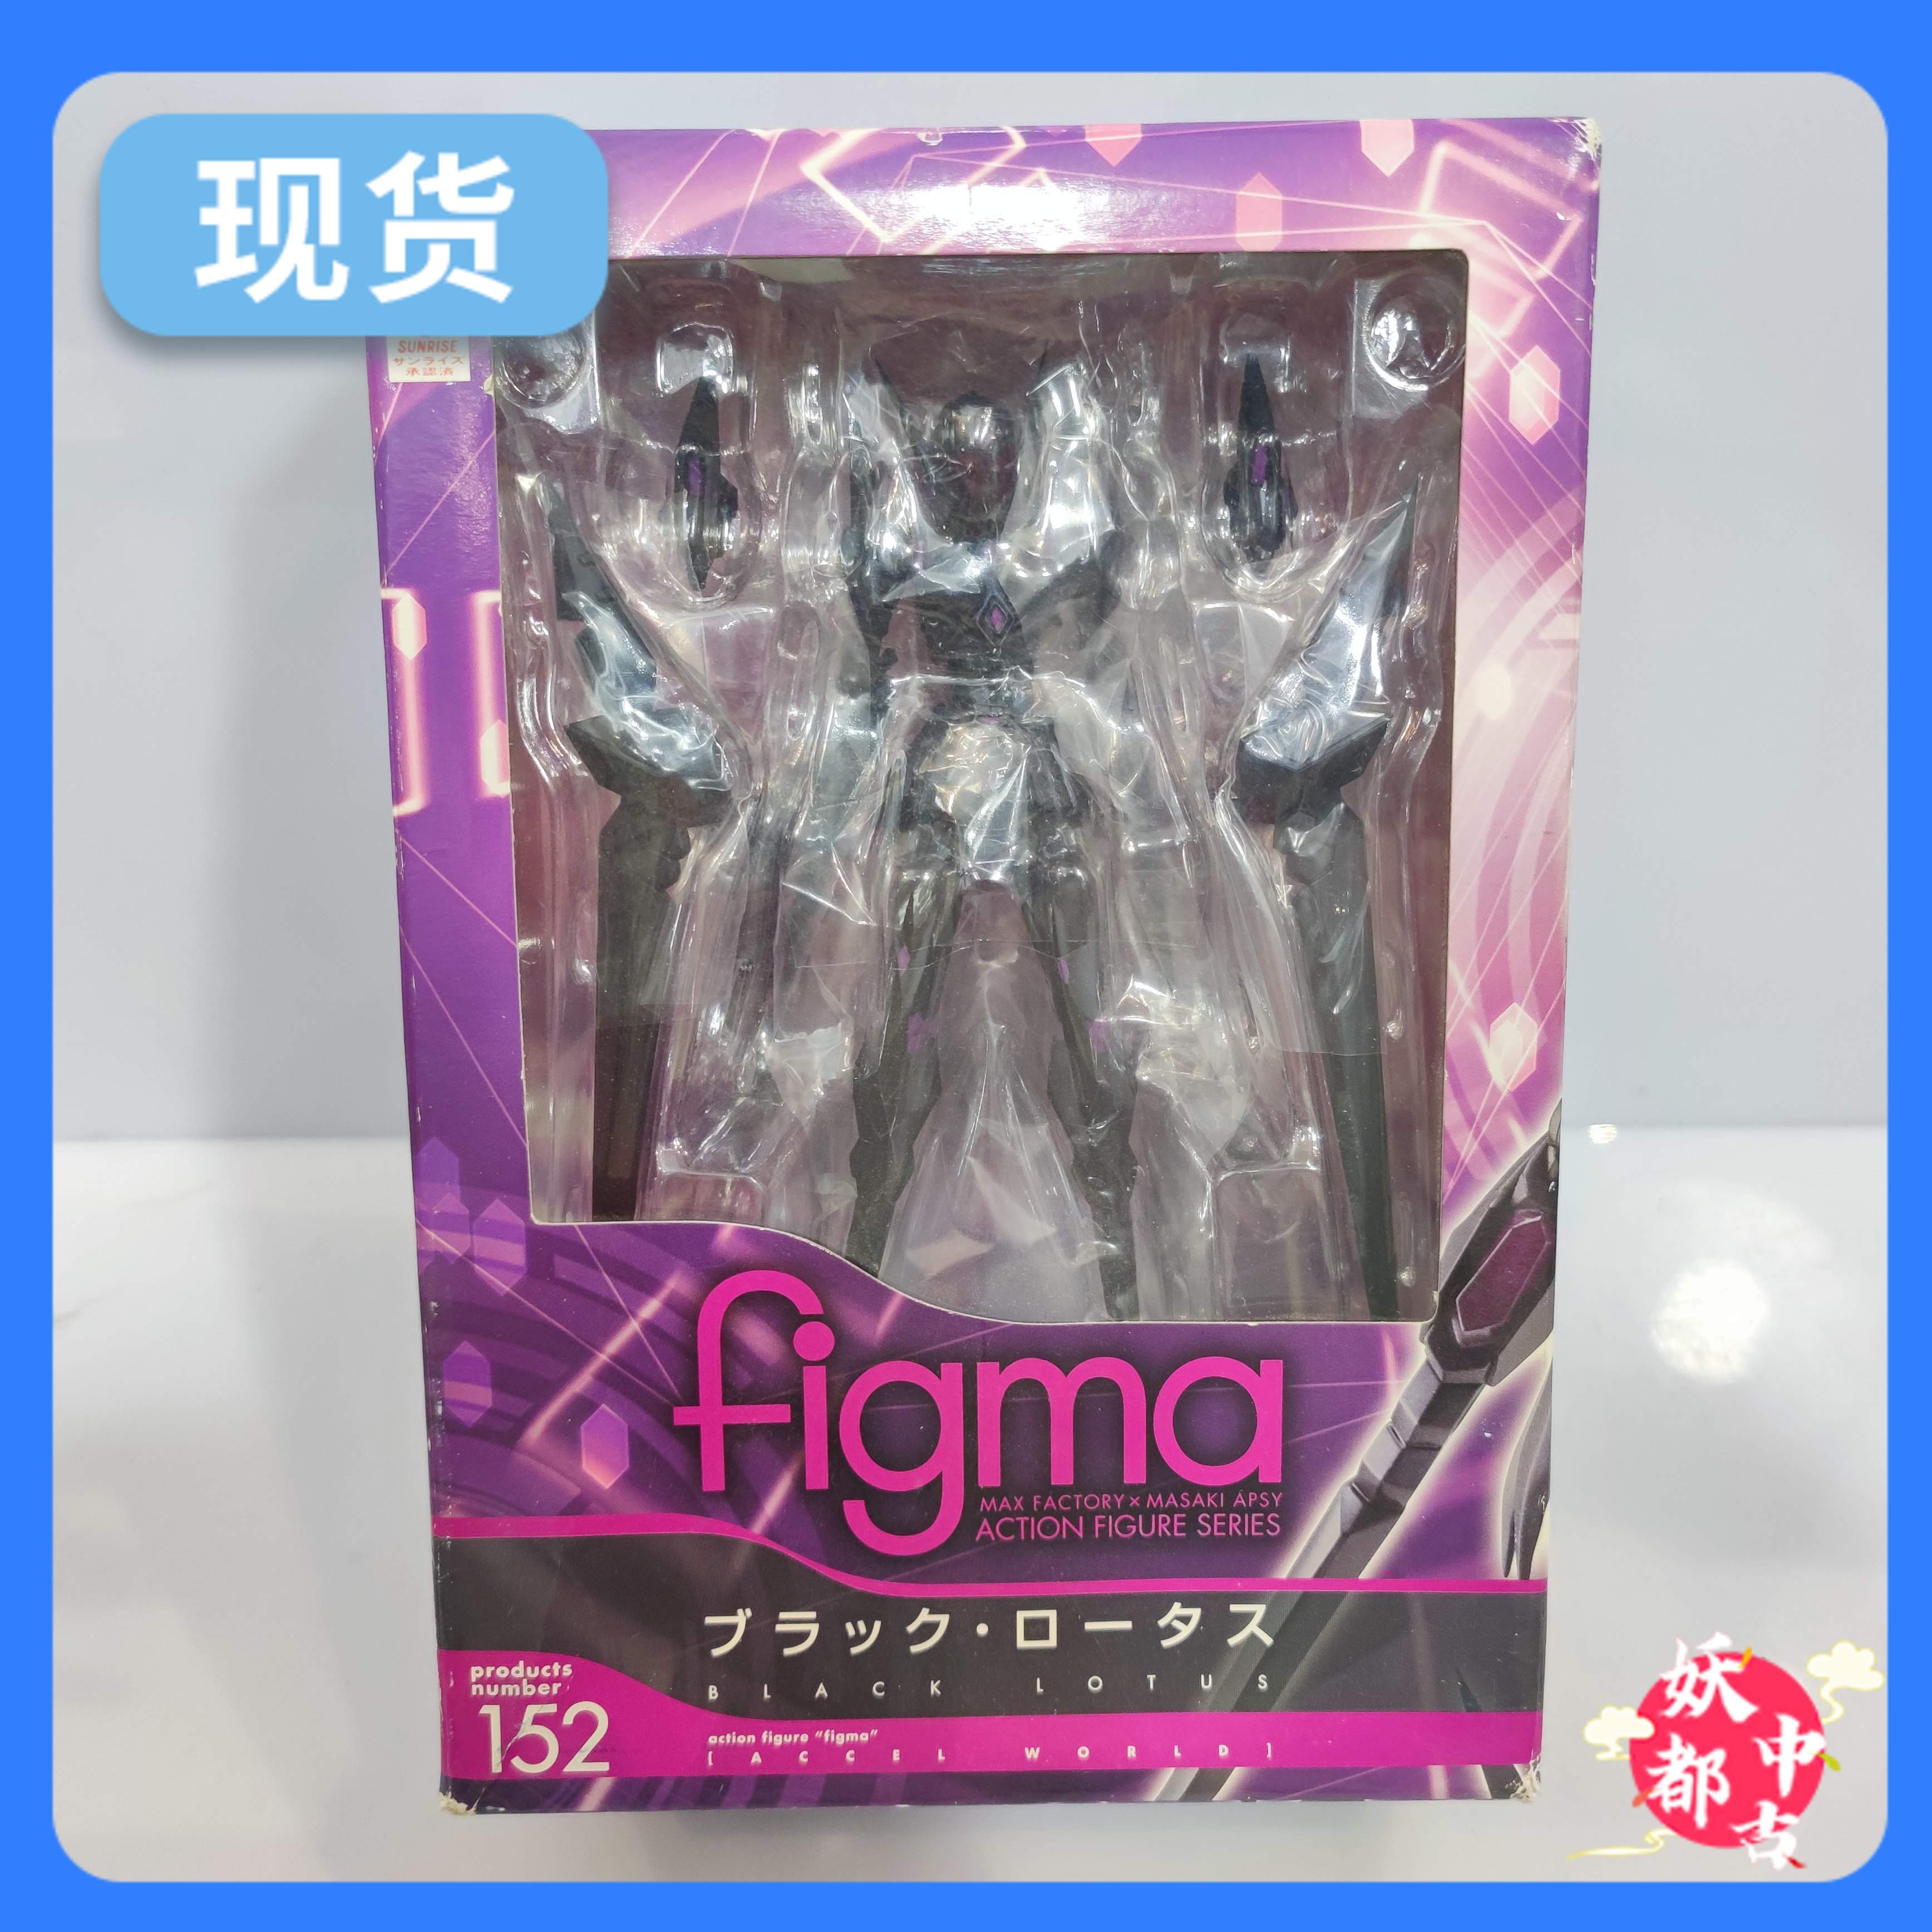 Demon capital spot figma 152 accelerates the world heixueji black water lily, which can be done by GAODA